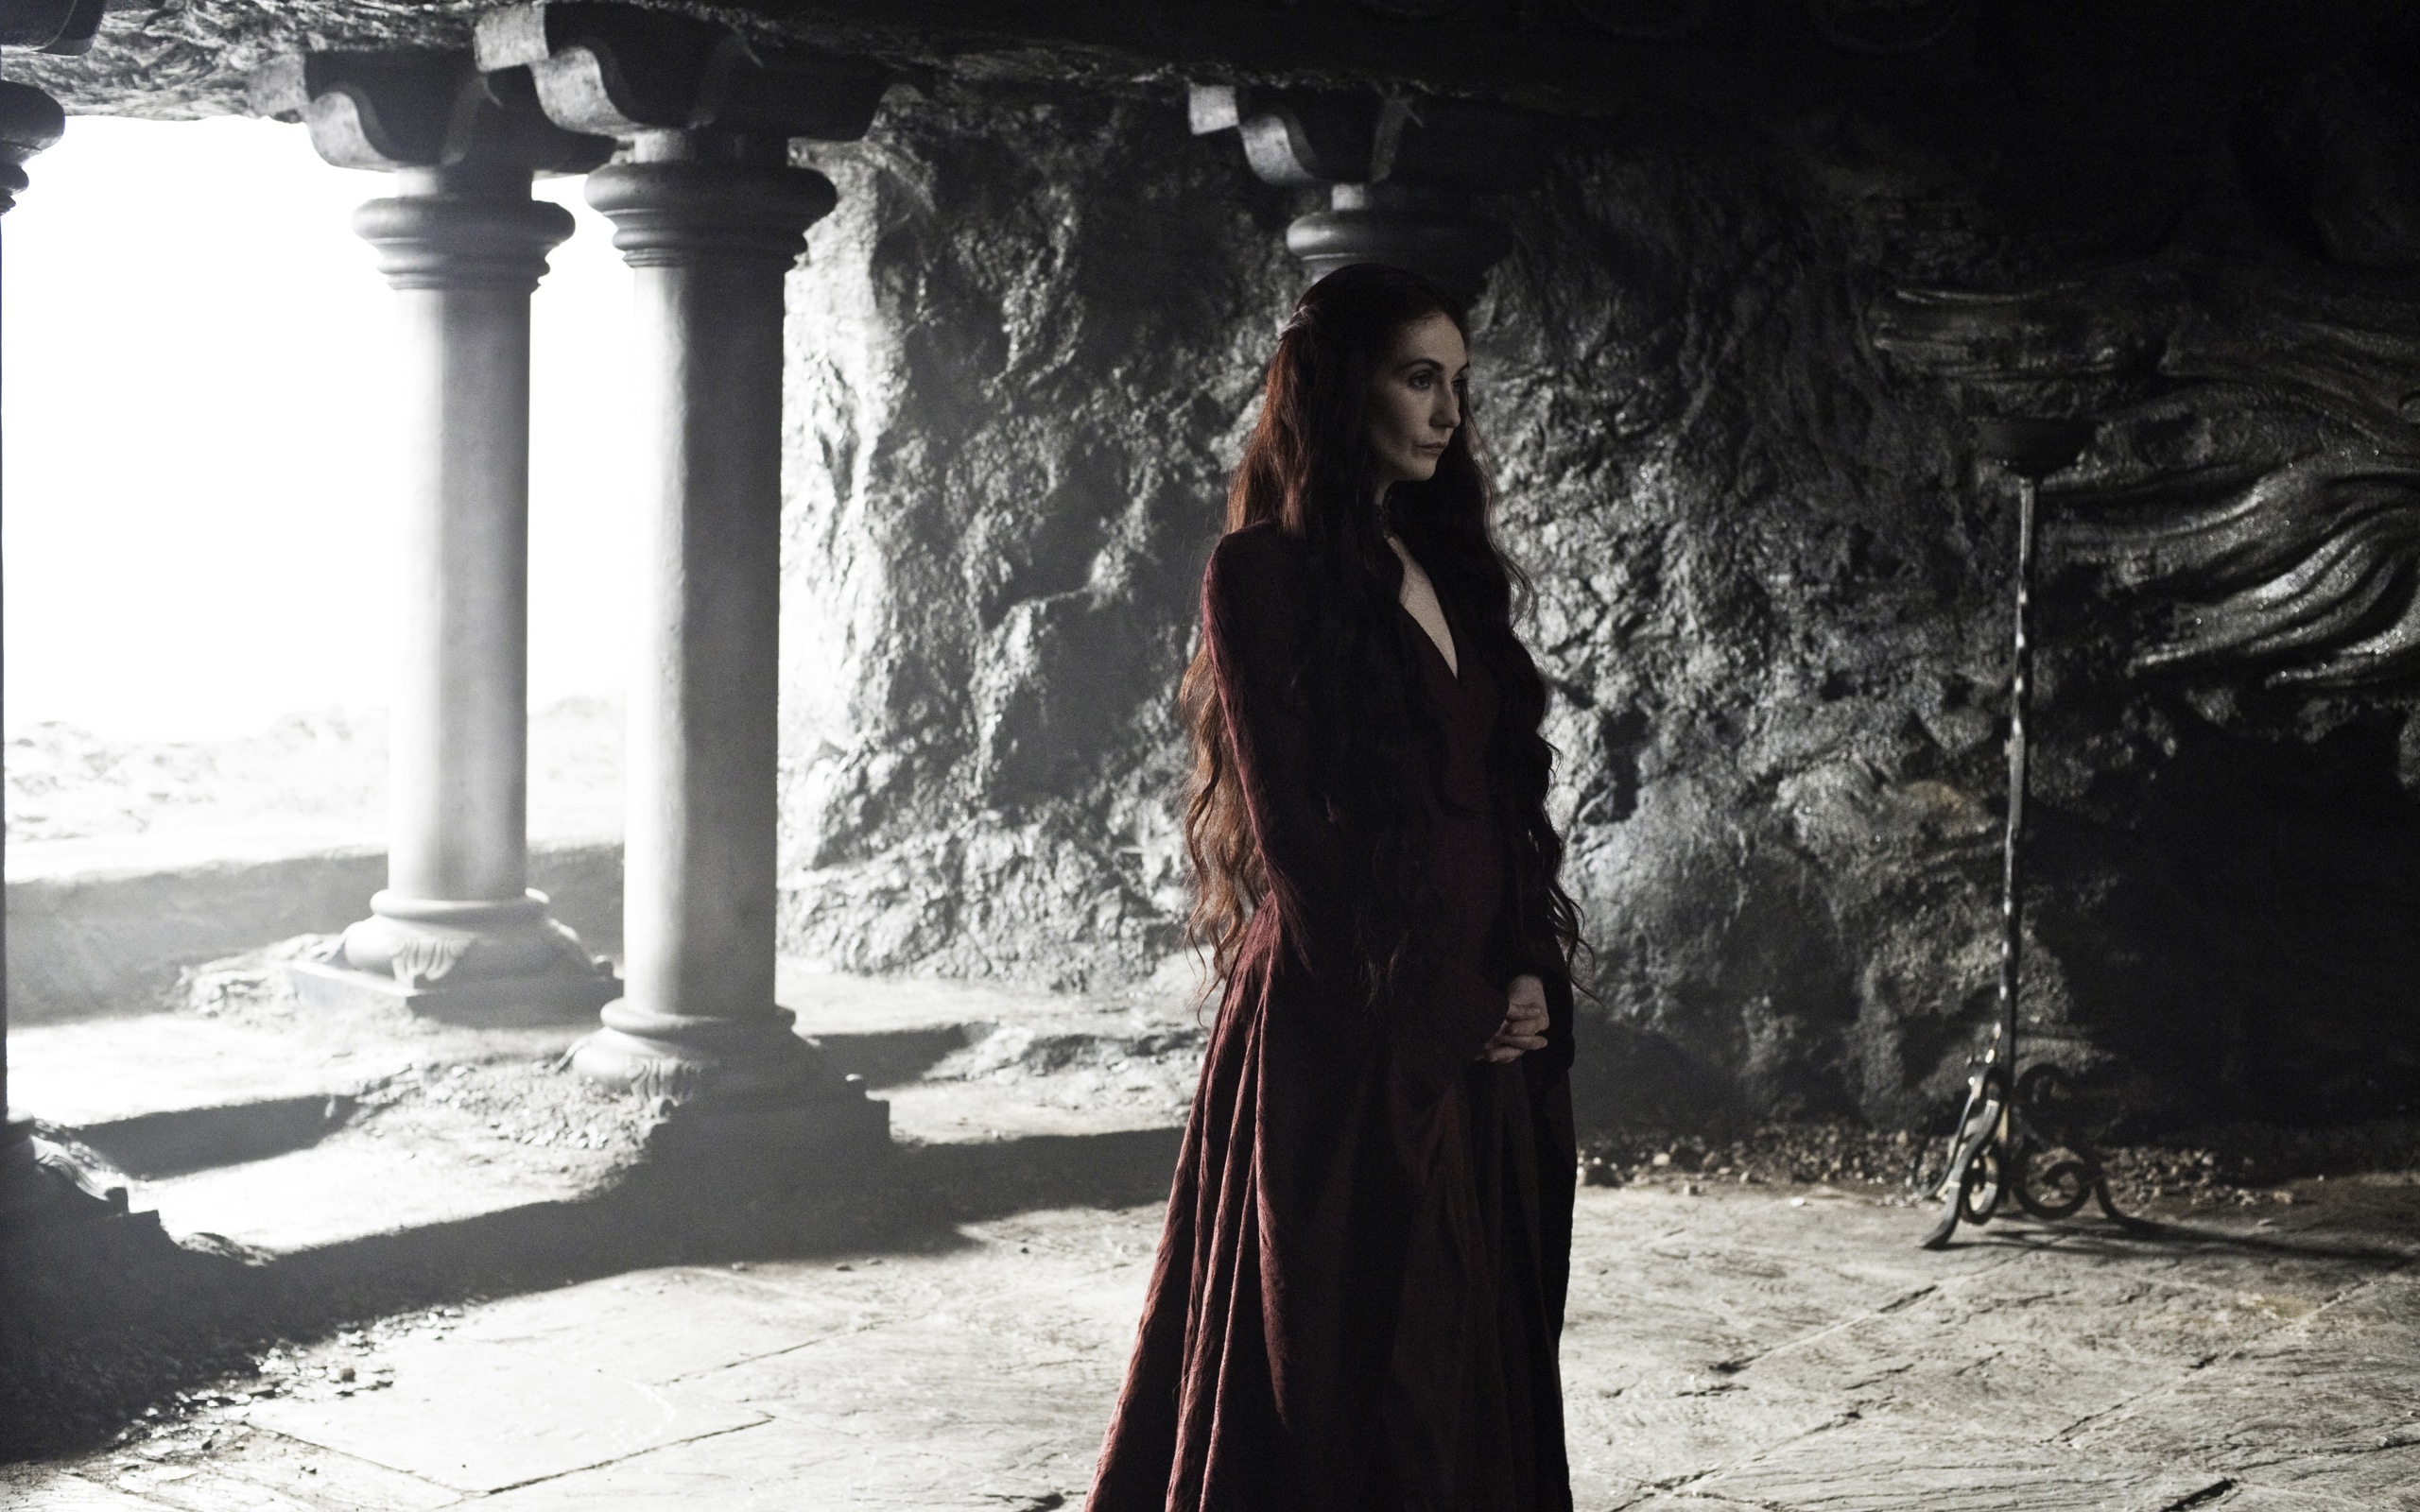 A Song of Ice and Fire: Game of Thrones 冰與火之歌：權力的遊戲高清壁紙 #34 - 2560x1600